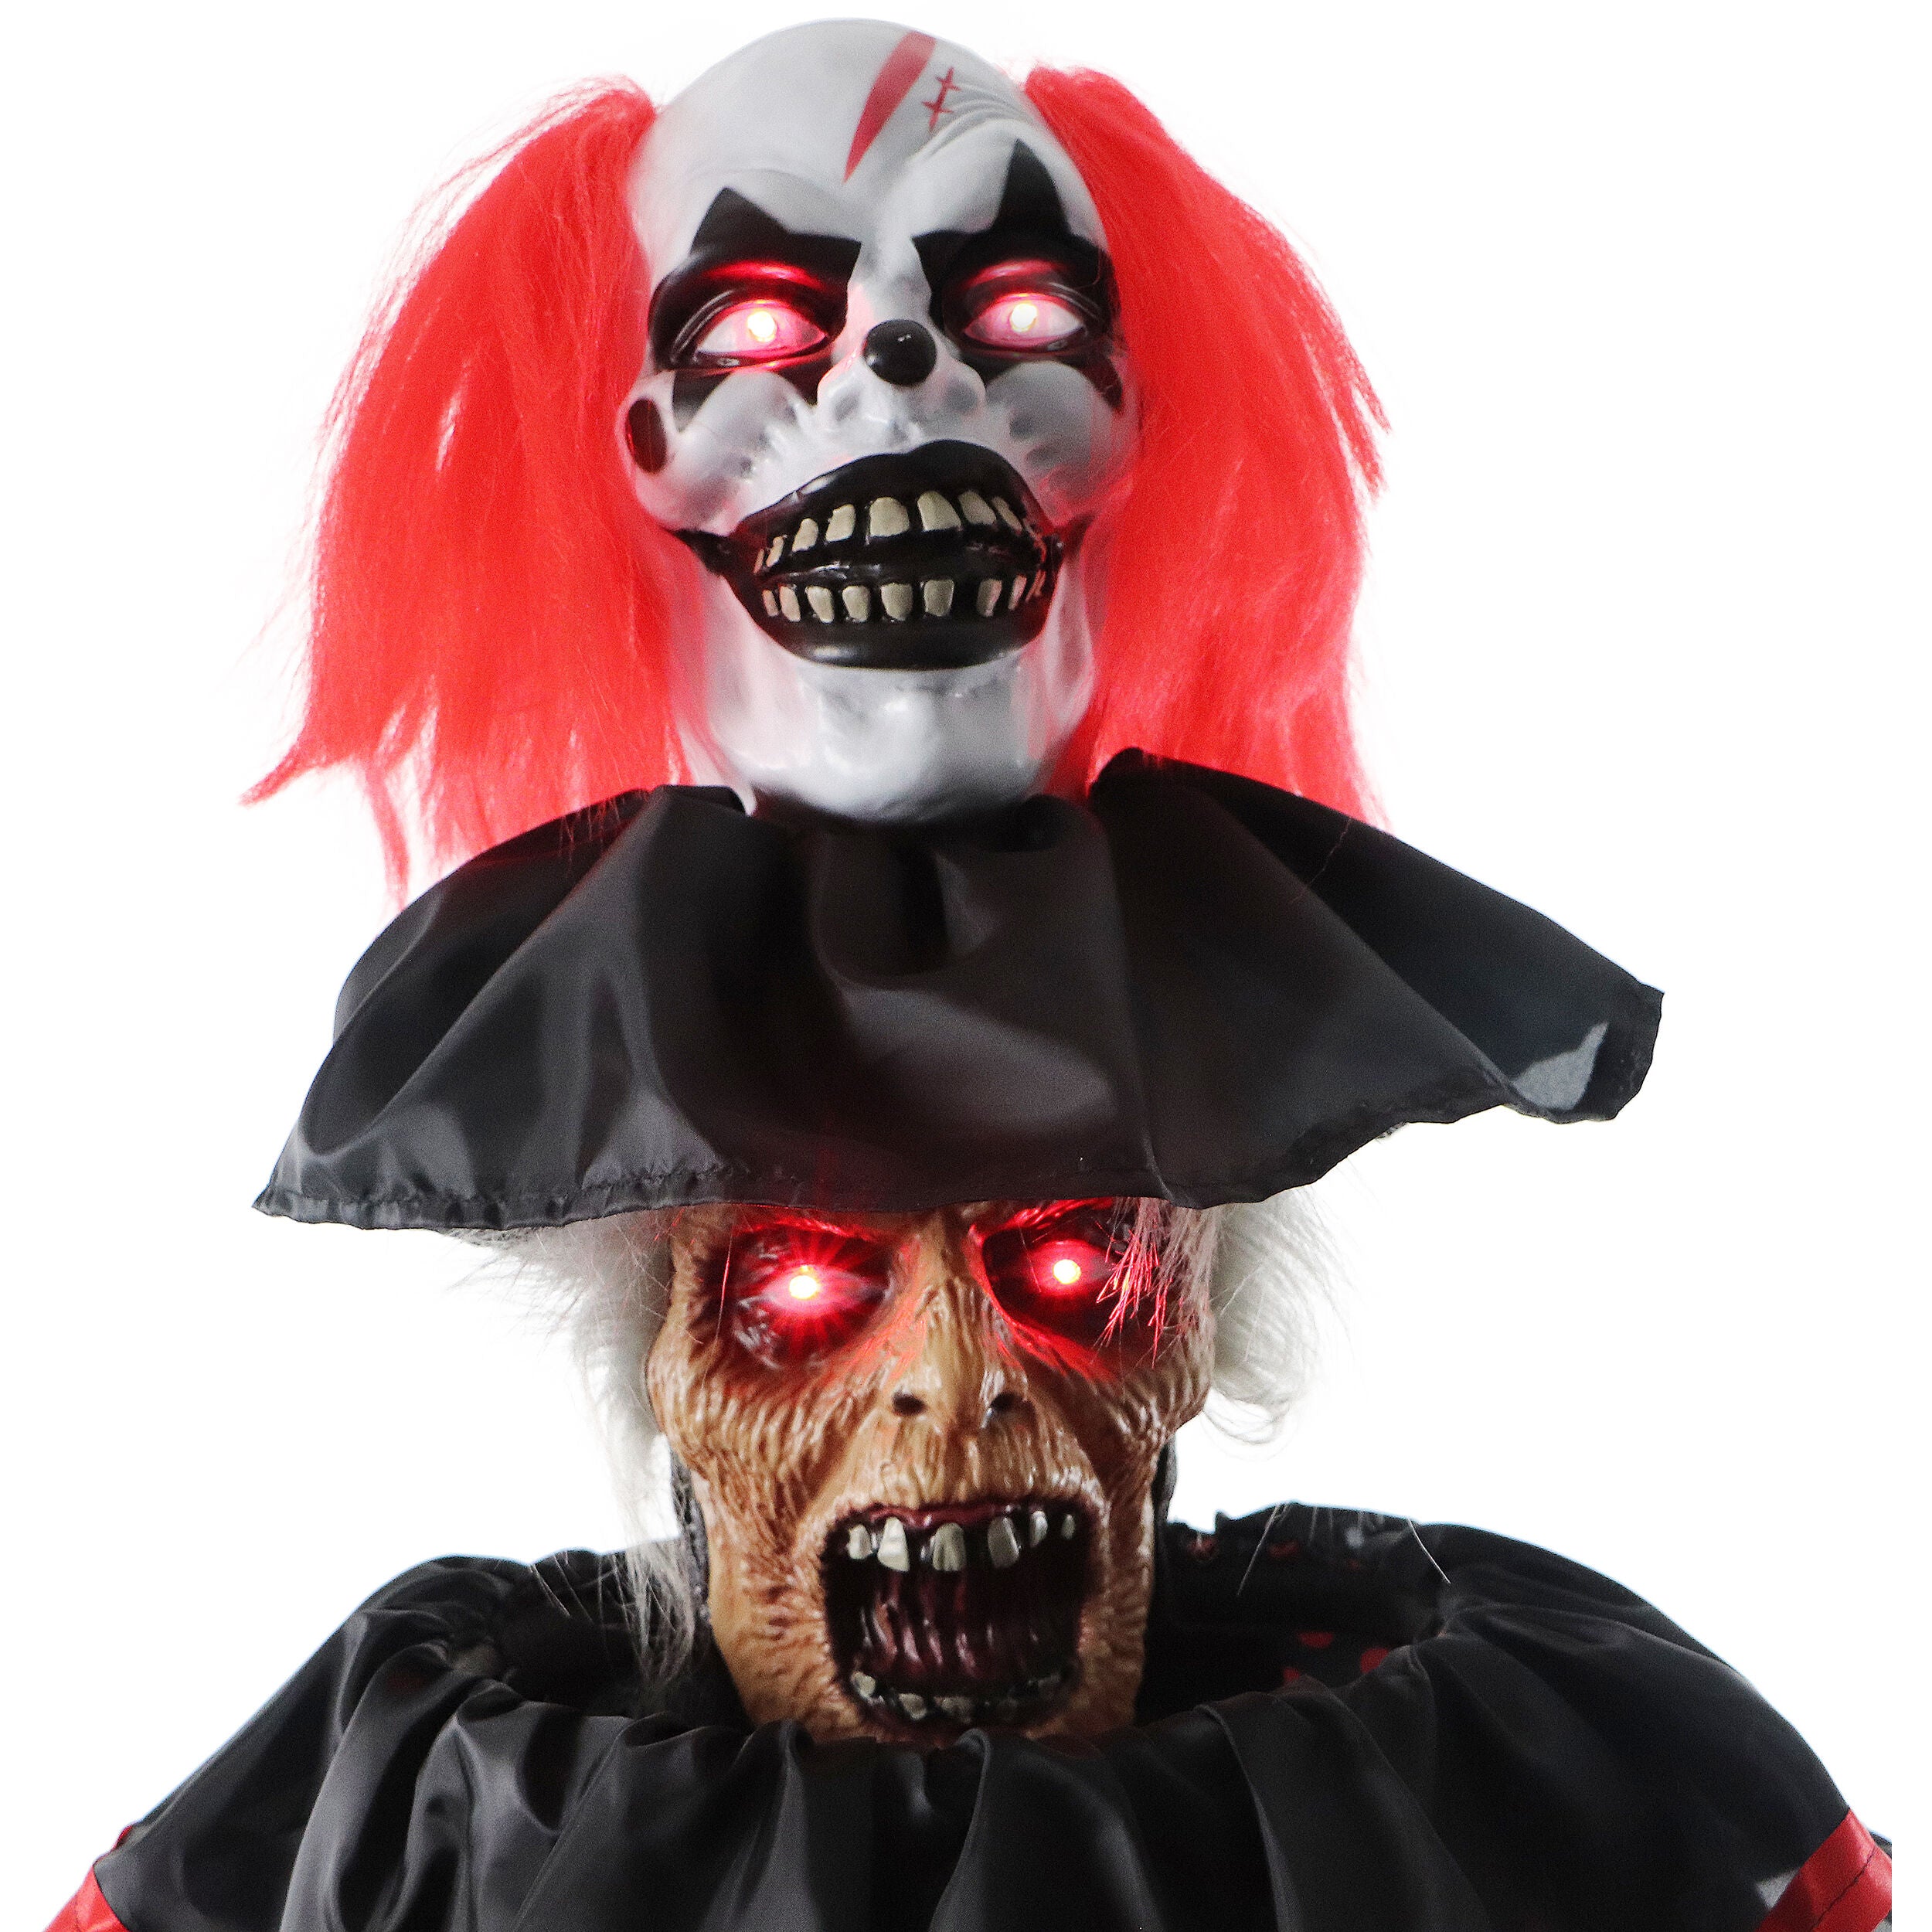 Haunted Hill Farm - Animatronic Pop-Up Two-Headed Clown with Light-Up Eyes for Scary Halloween Decoration